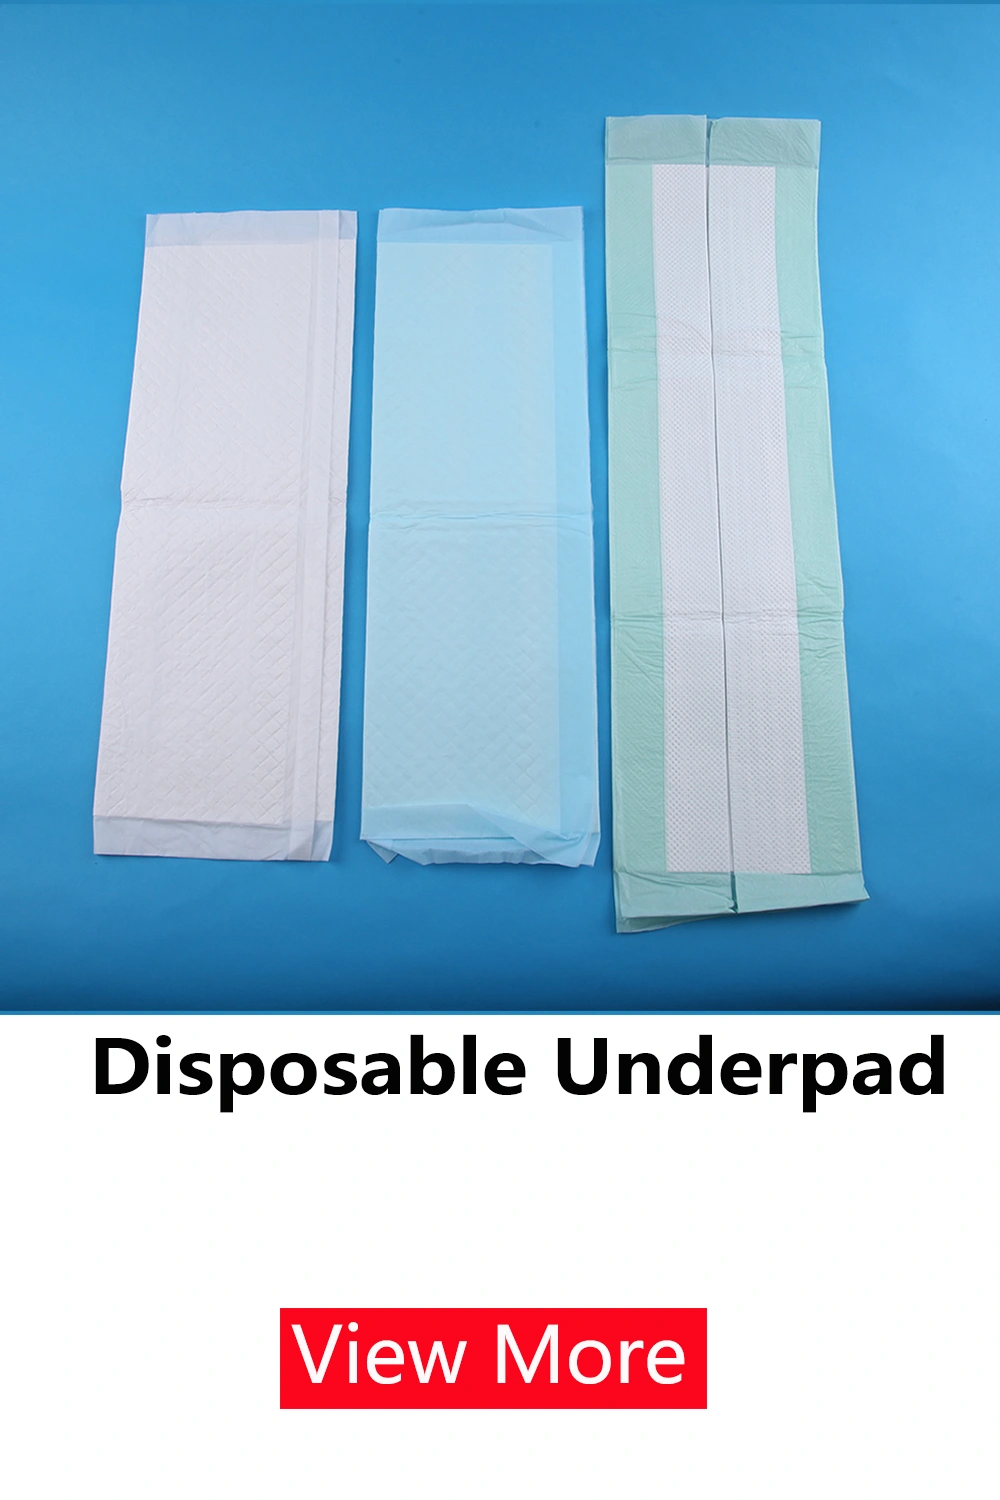 adult panty diaper related product disposable underpad picture